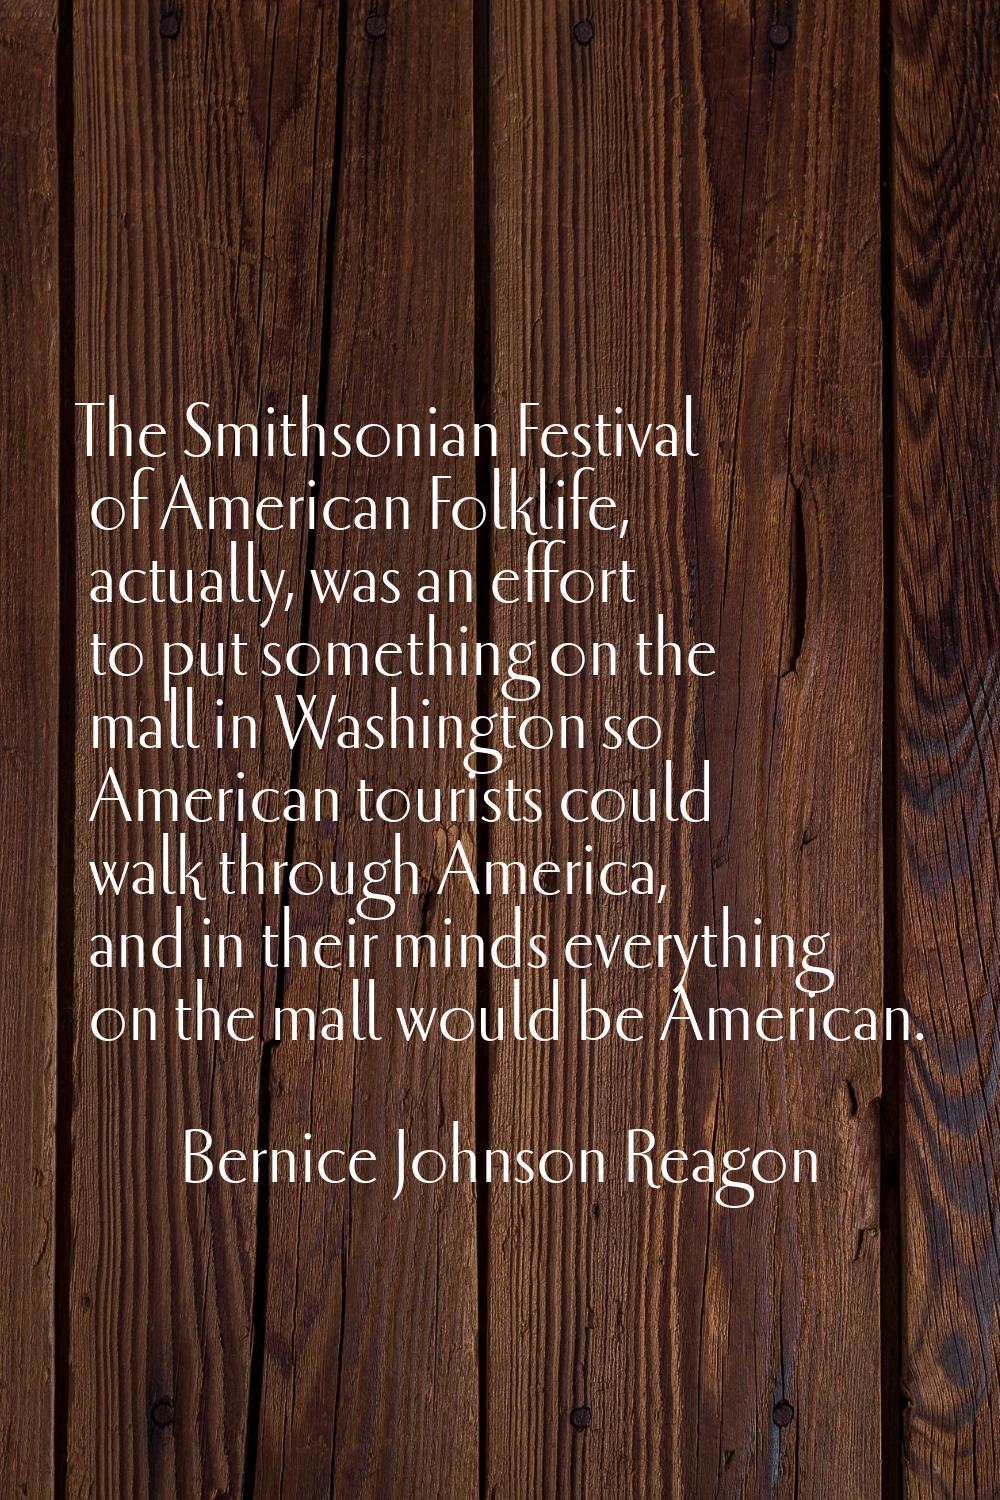 The Smithsonian Festival of American Folklife, actually, was an effort to put something on the mall